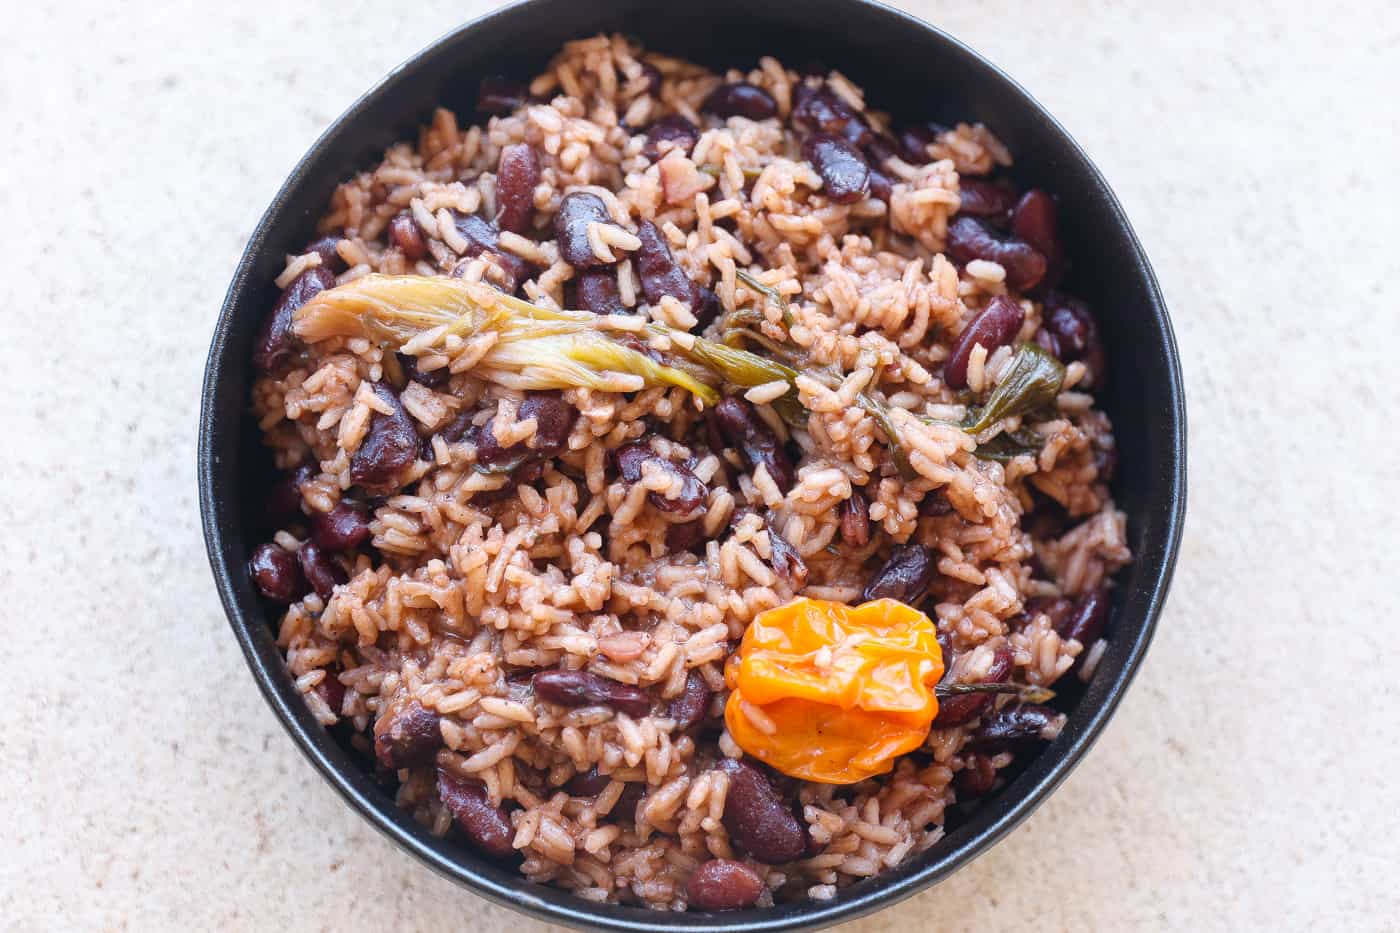 jamaican rice and peas in black bowls